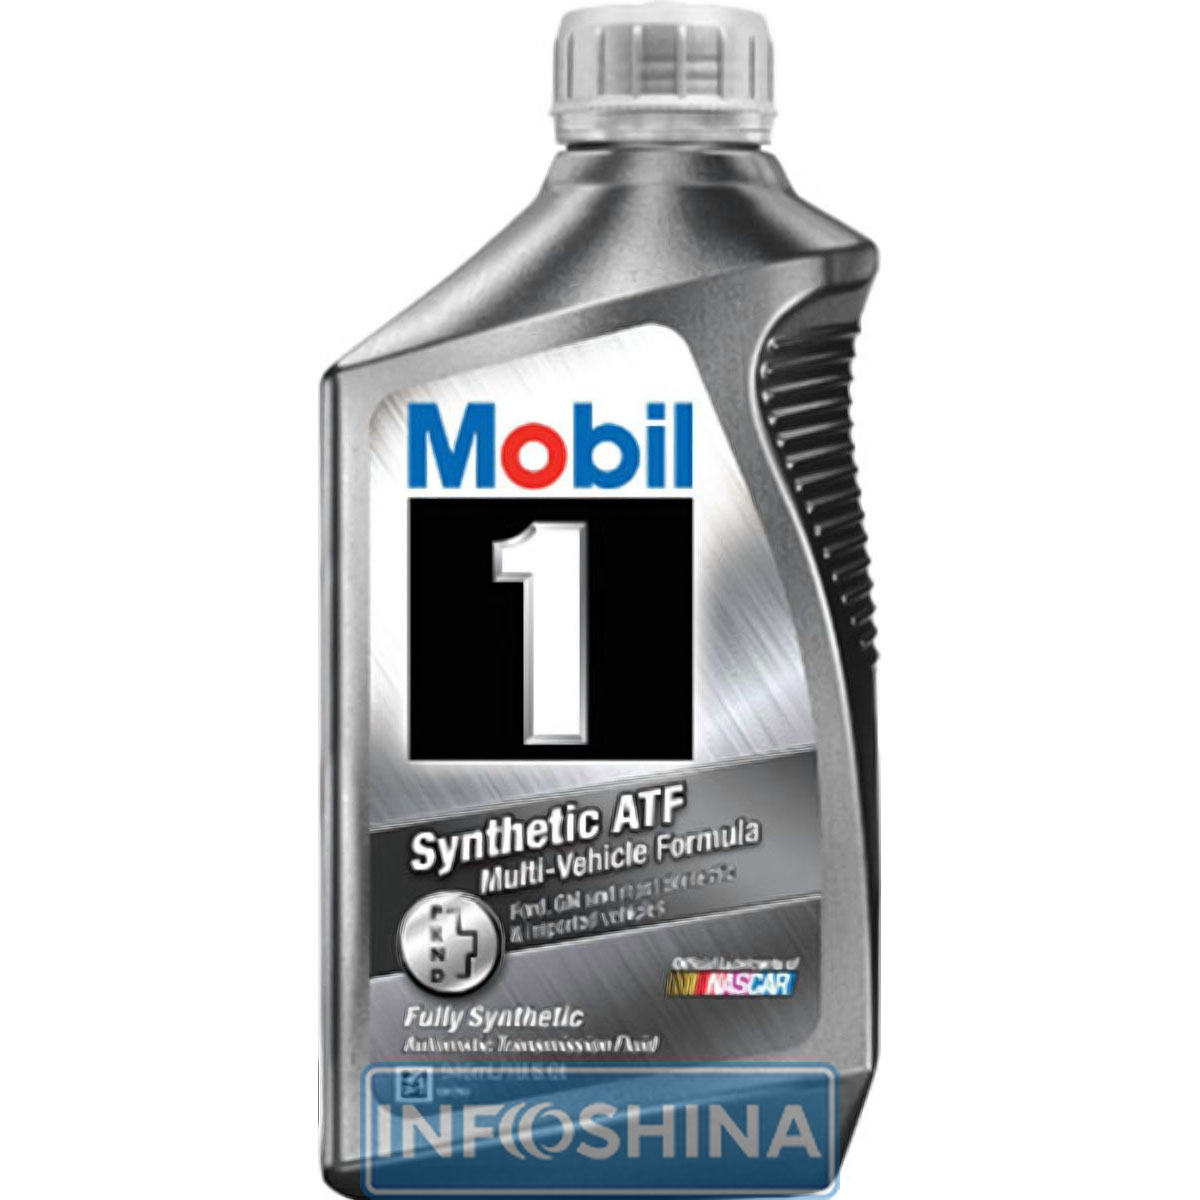 Mobil Synthetic ATF